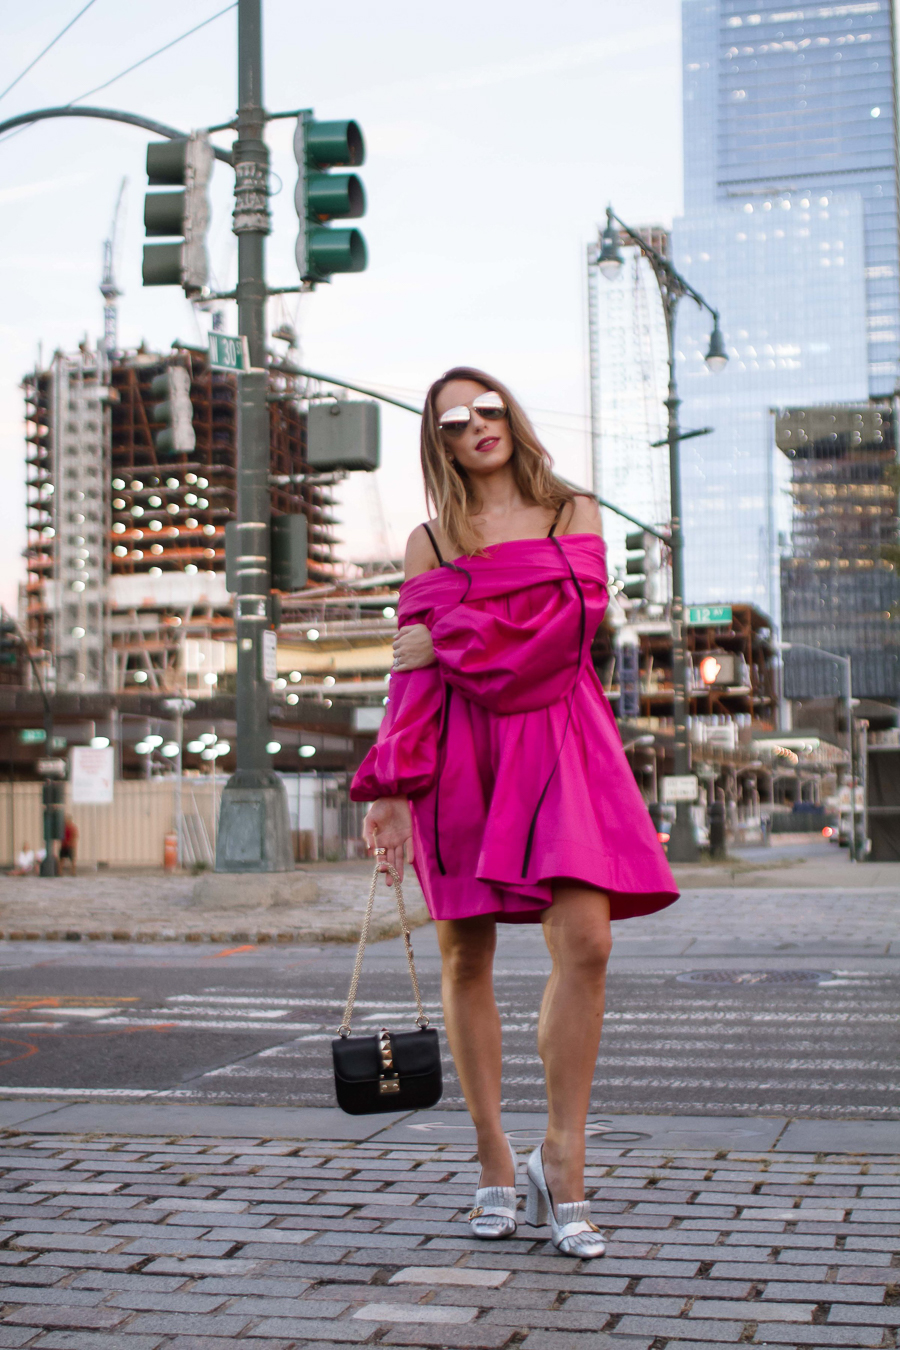 sabrina-chakici-clutch-and-carry-on-clutch-carry-on-uk-travel-blogger-nyfw-isa-arfen-pink-ress-gucci-silver-shoes-net-a-porter-helicopter-9